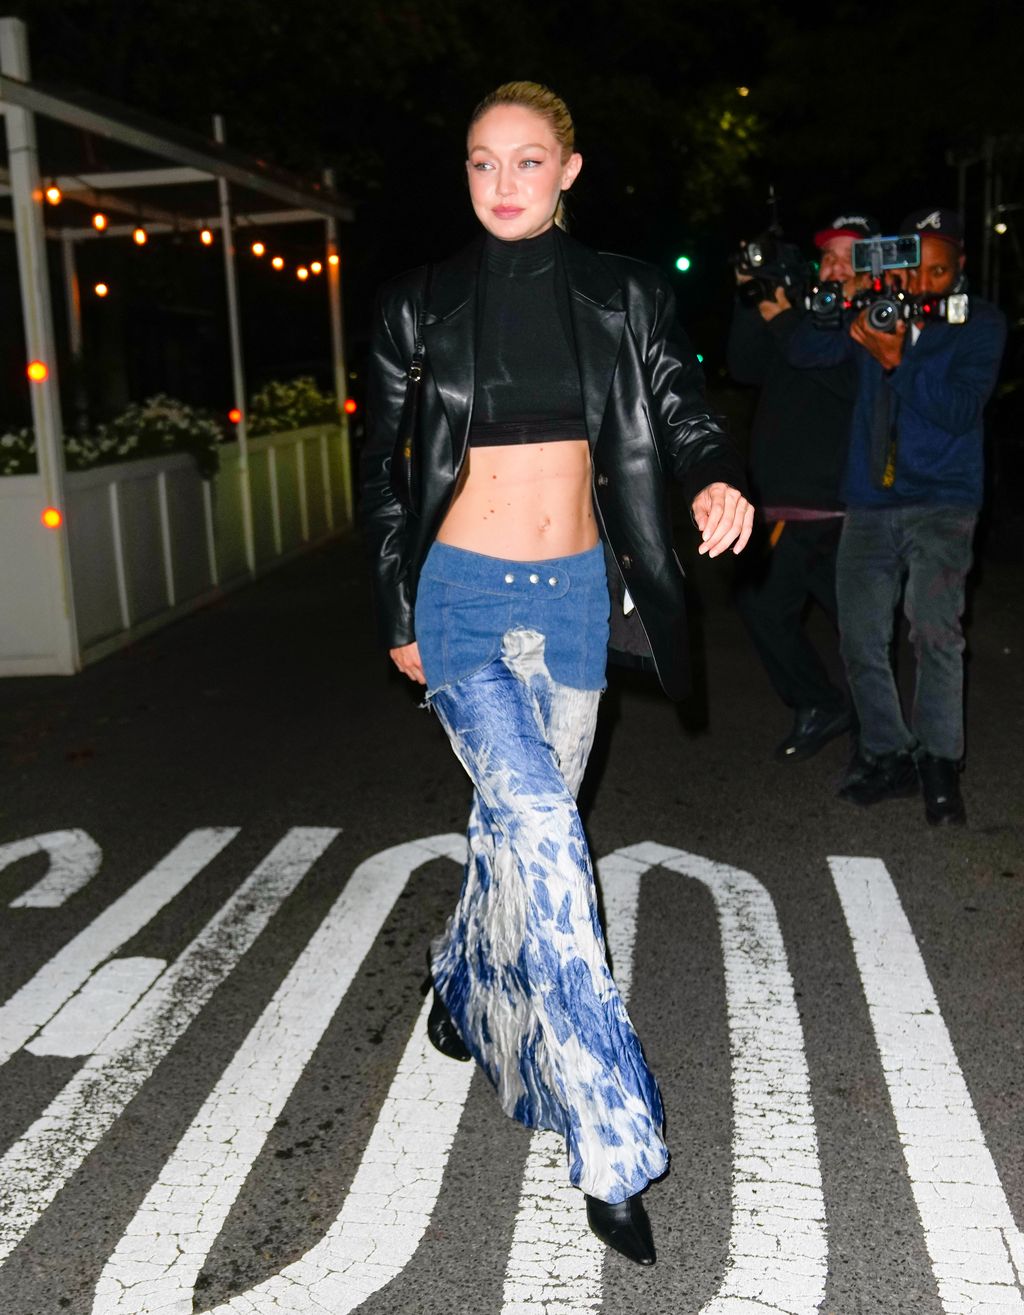 NEW YORK, NEW YORK - OCTOBER 09: Gigi Hadid is seen attending Bella Hadid's birthday party at Lucali's on October 09, 2022 in New York City. (Photo by Gotham/GC Images)